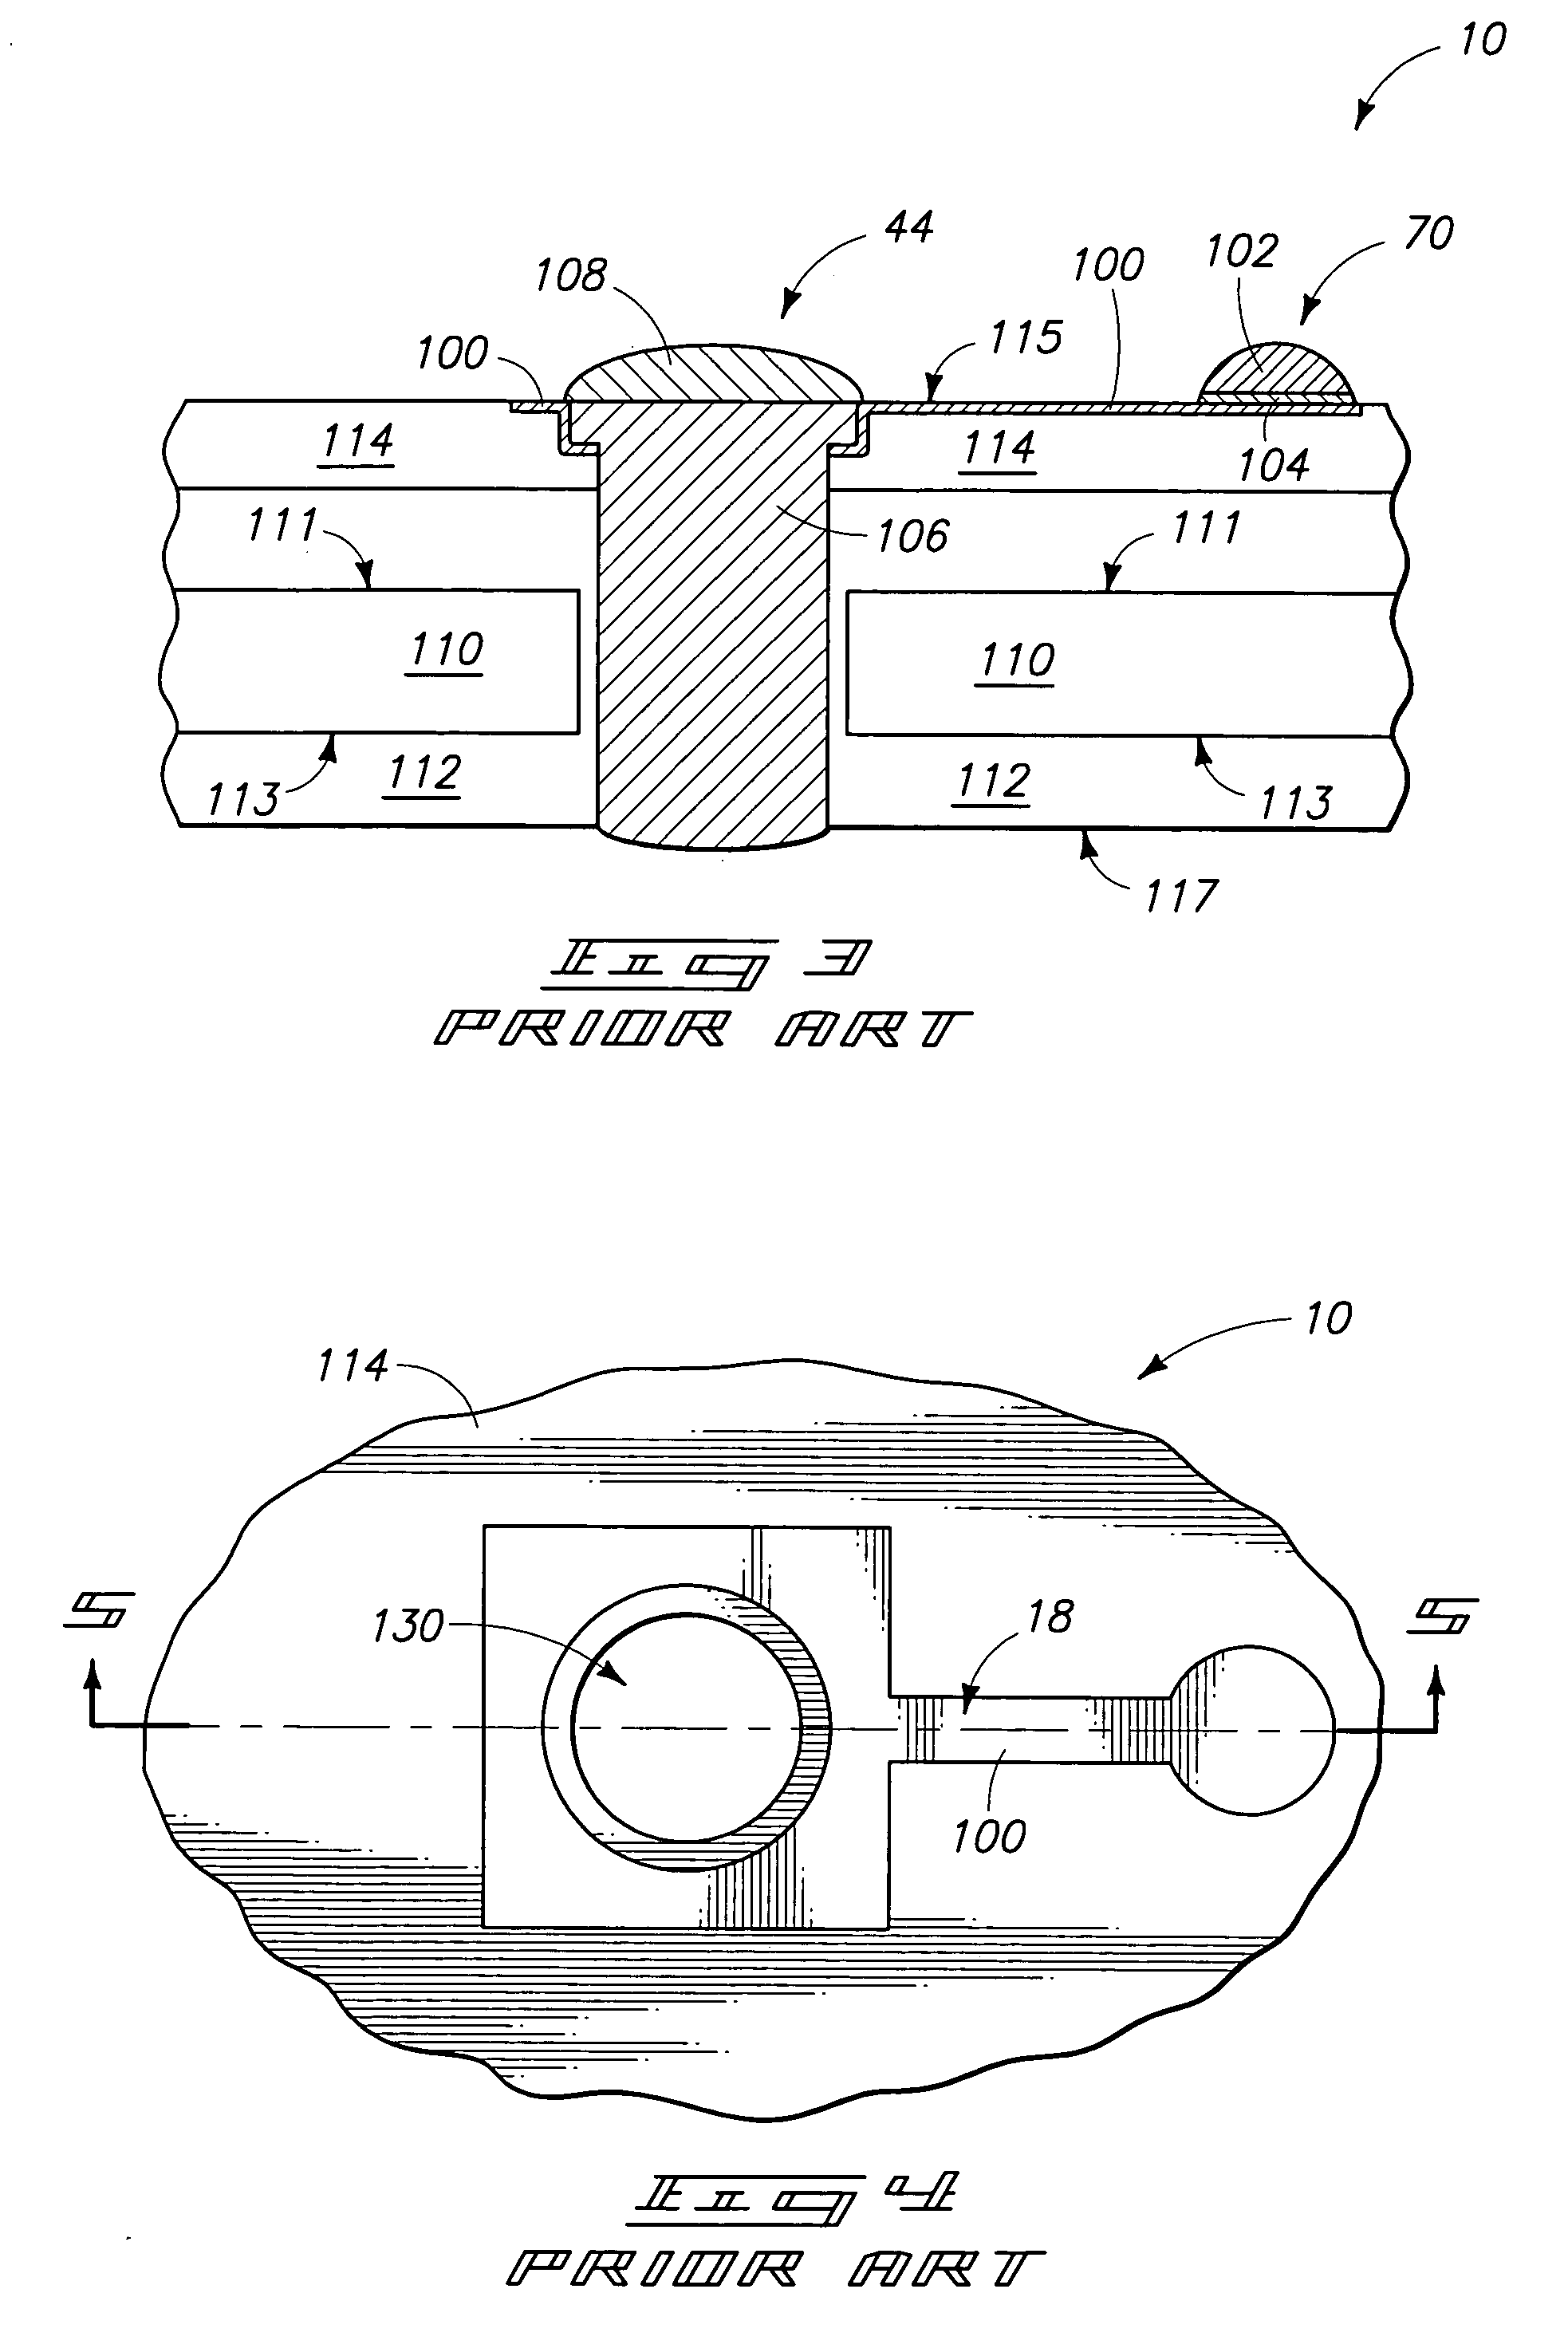 Methods of fabricating interconnects for semiconductor components including plating solder-wetting material and solder filling